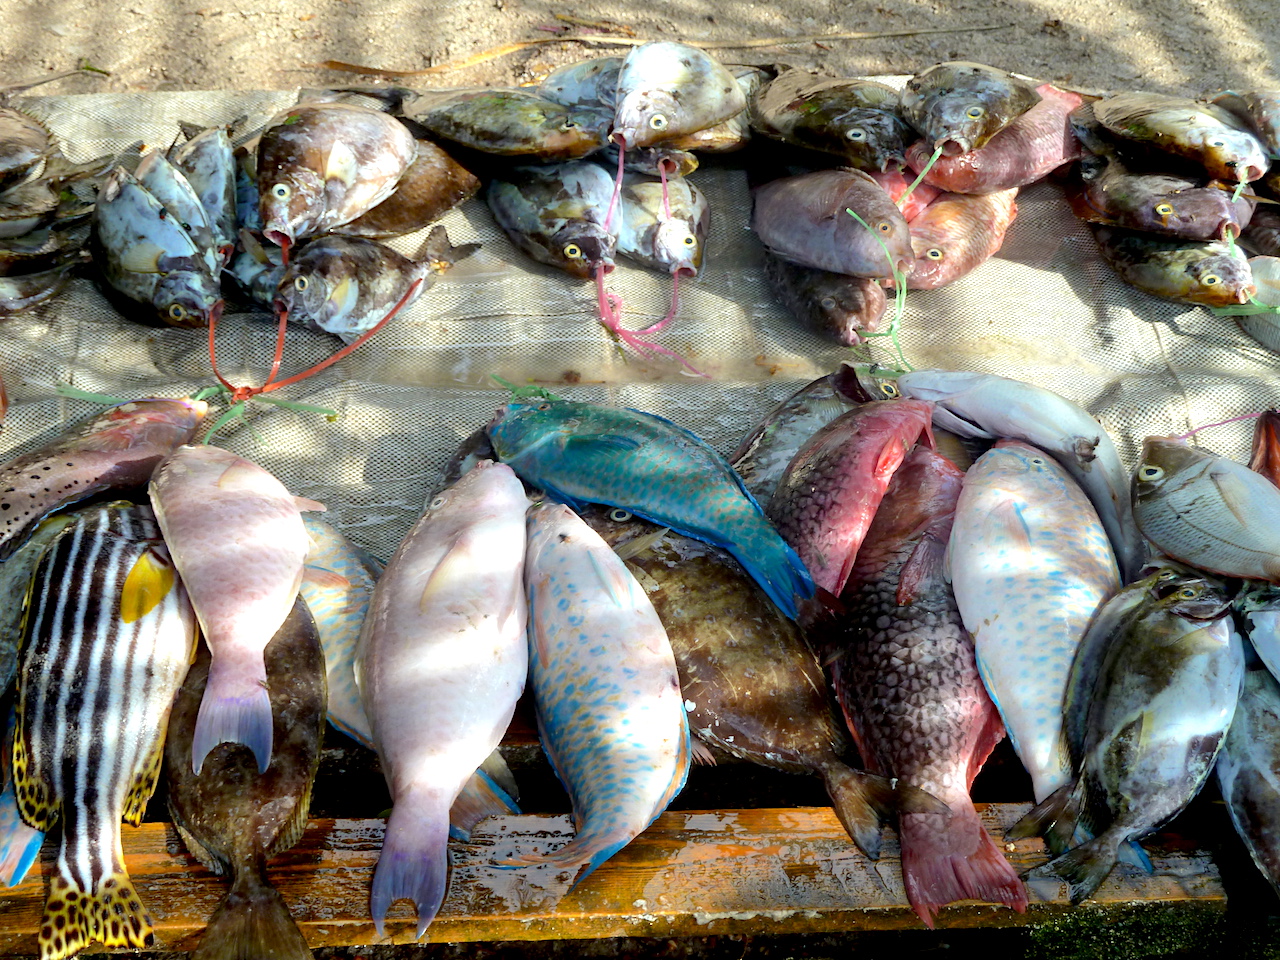 Fish on the side of the road on Mahé, Seychelles. #FishMarket #Mahe #Seychelles #SeychellesBeach